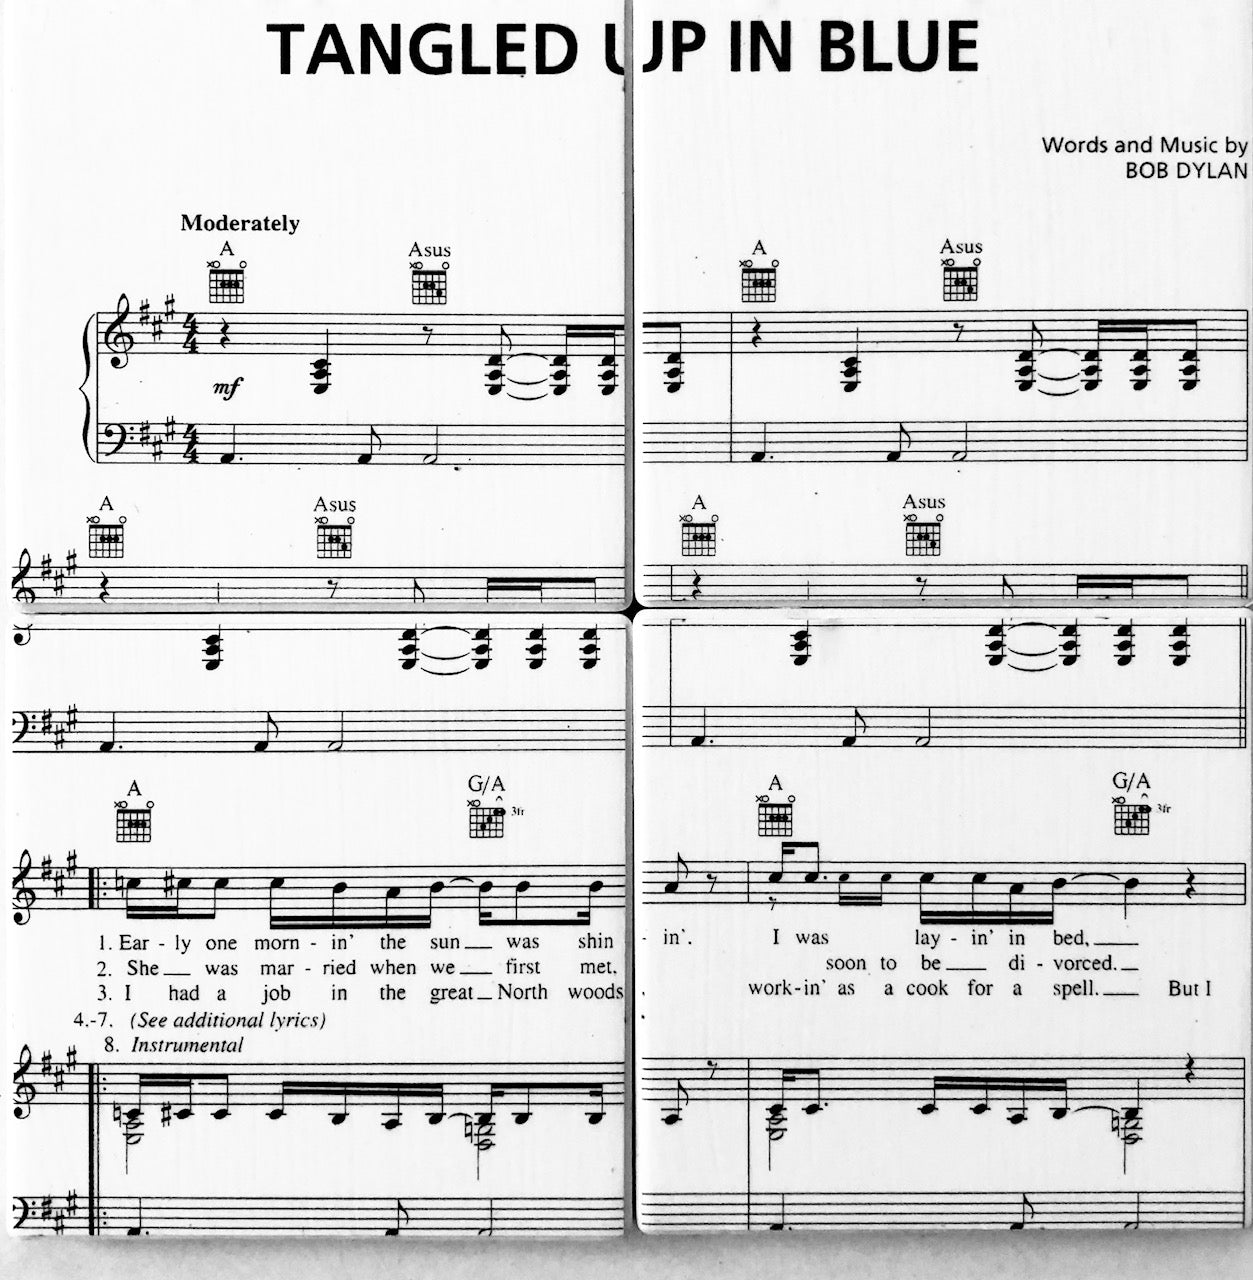 BOB DYLAN - Tangled Up In Blue